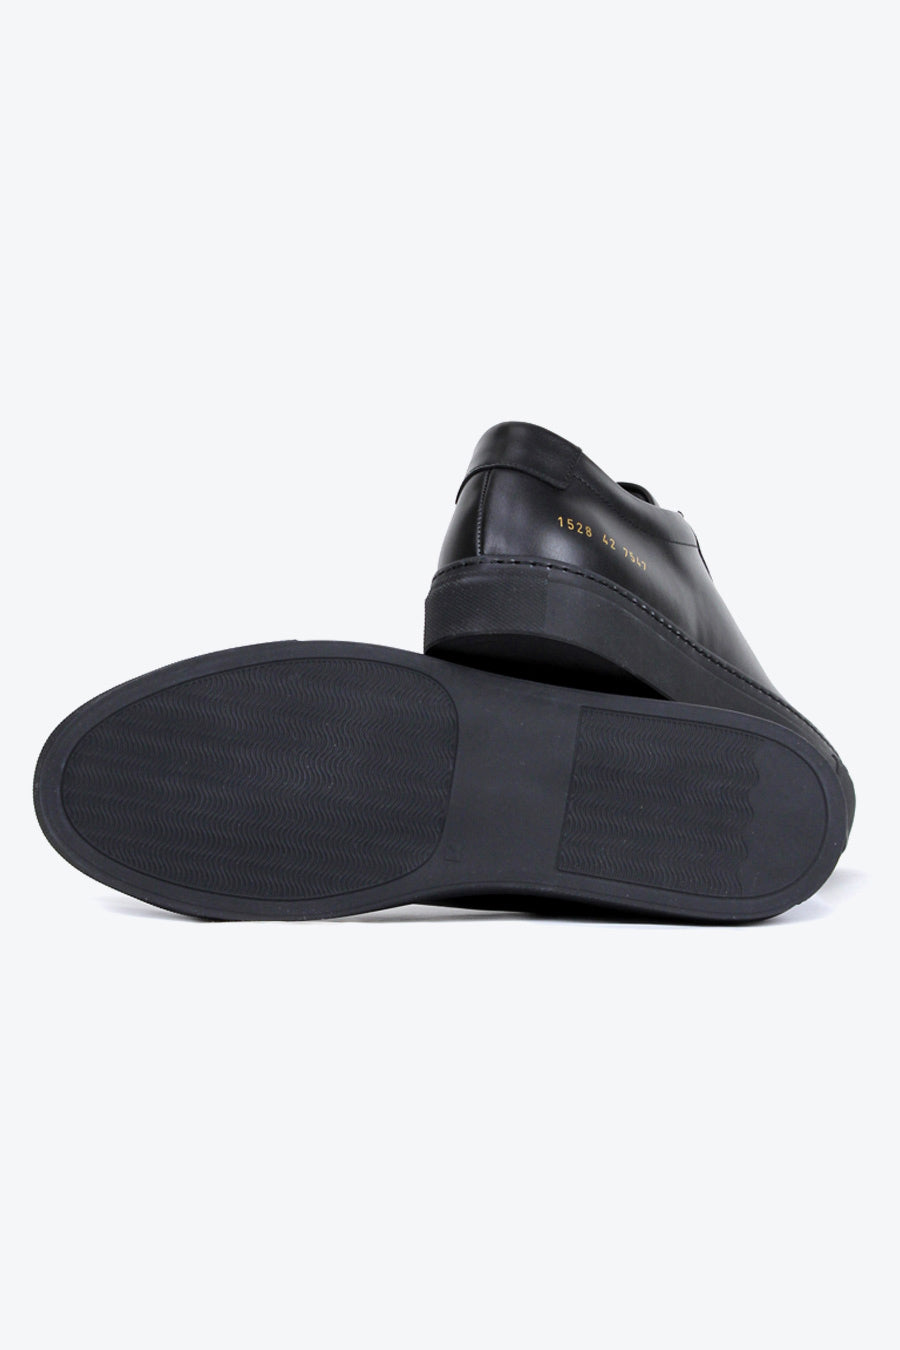 COMMON PROJECTS | ORIGINAL ACHILLES LOW 1528 / BLACK 7547 アキレス